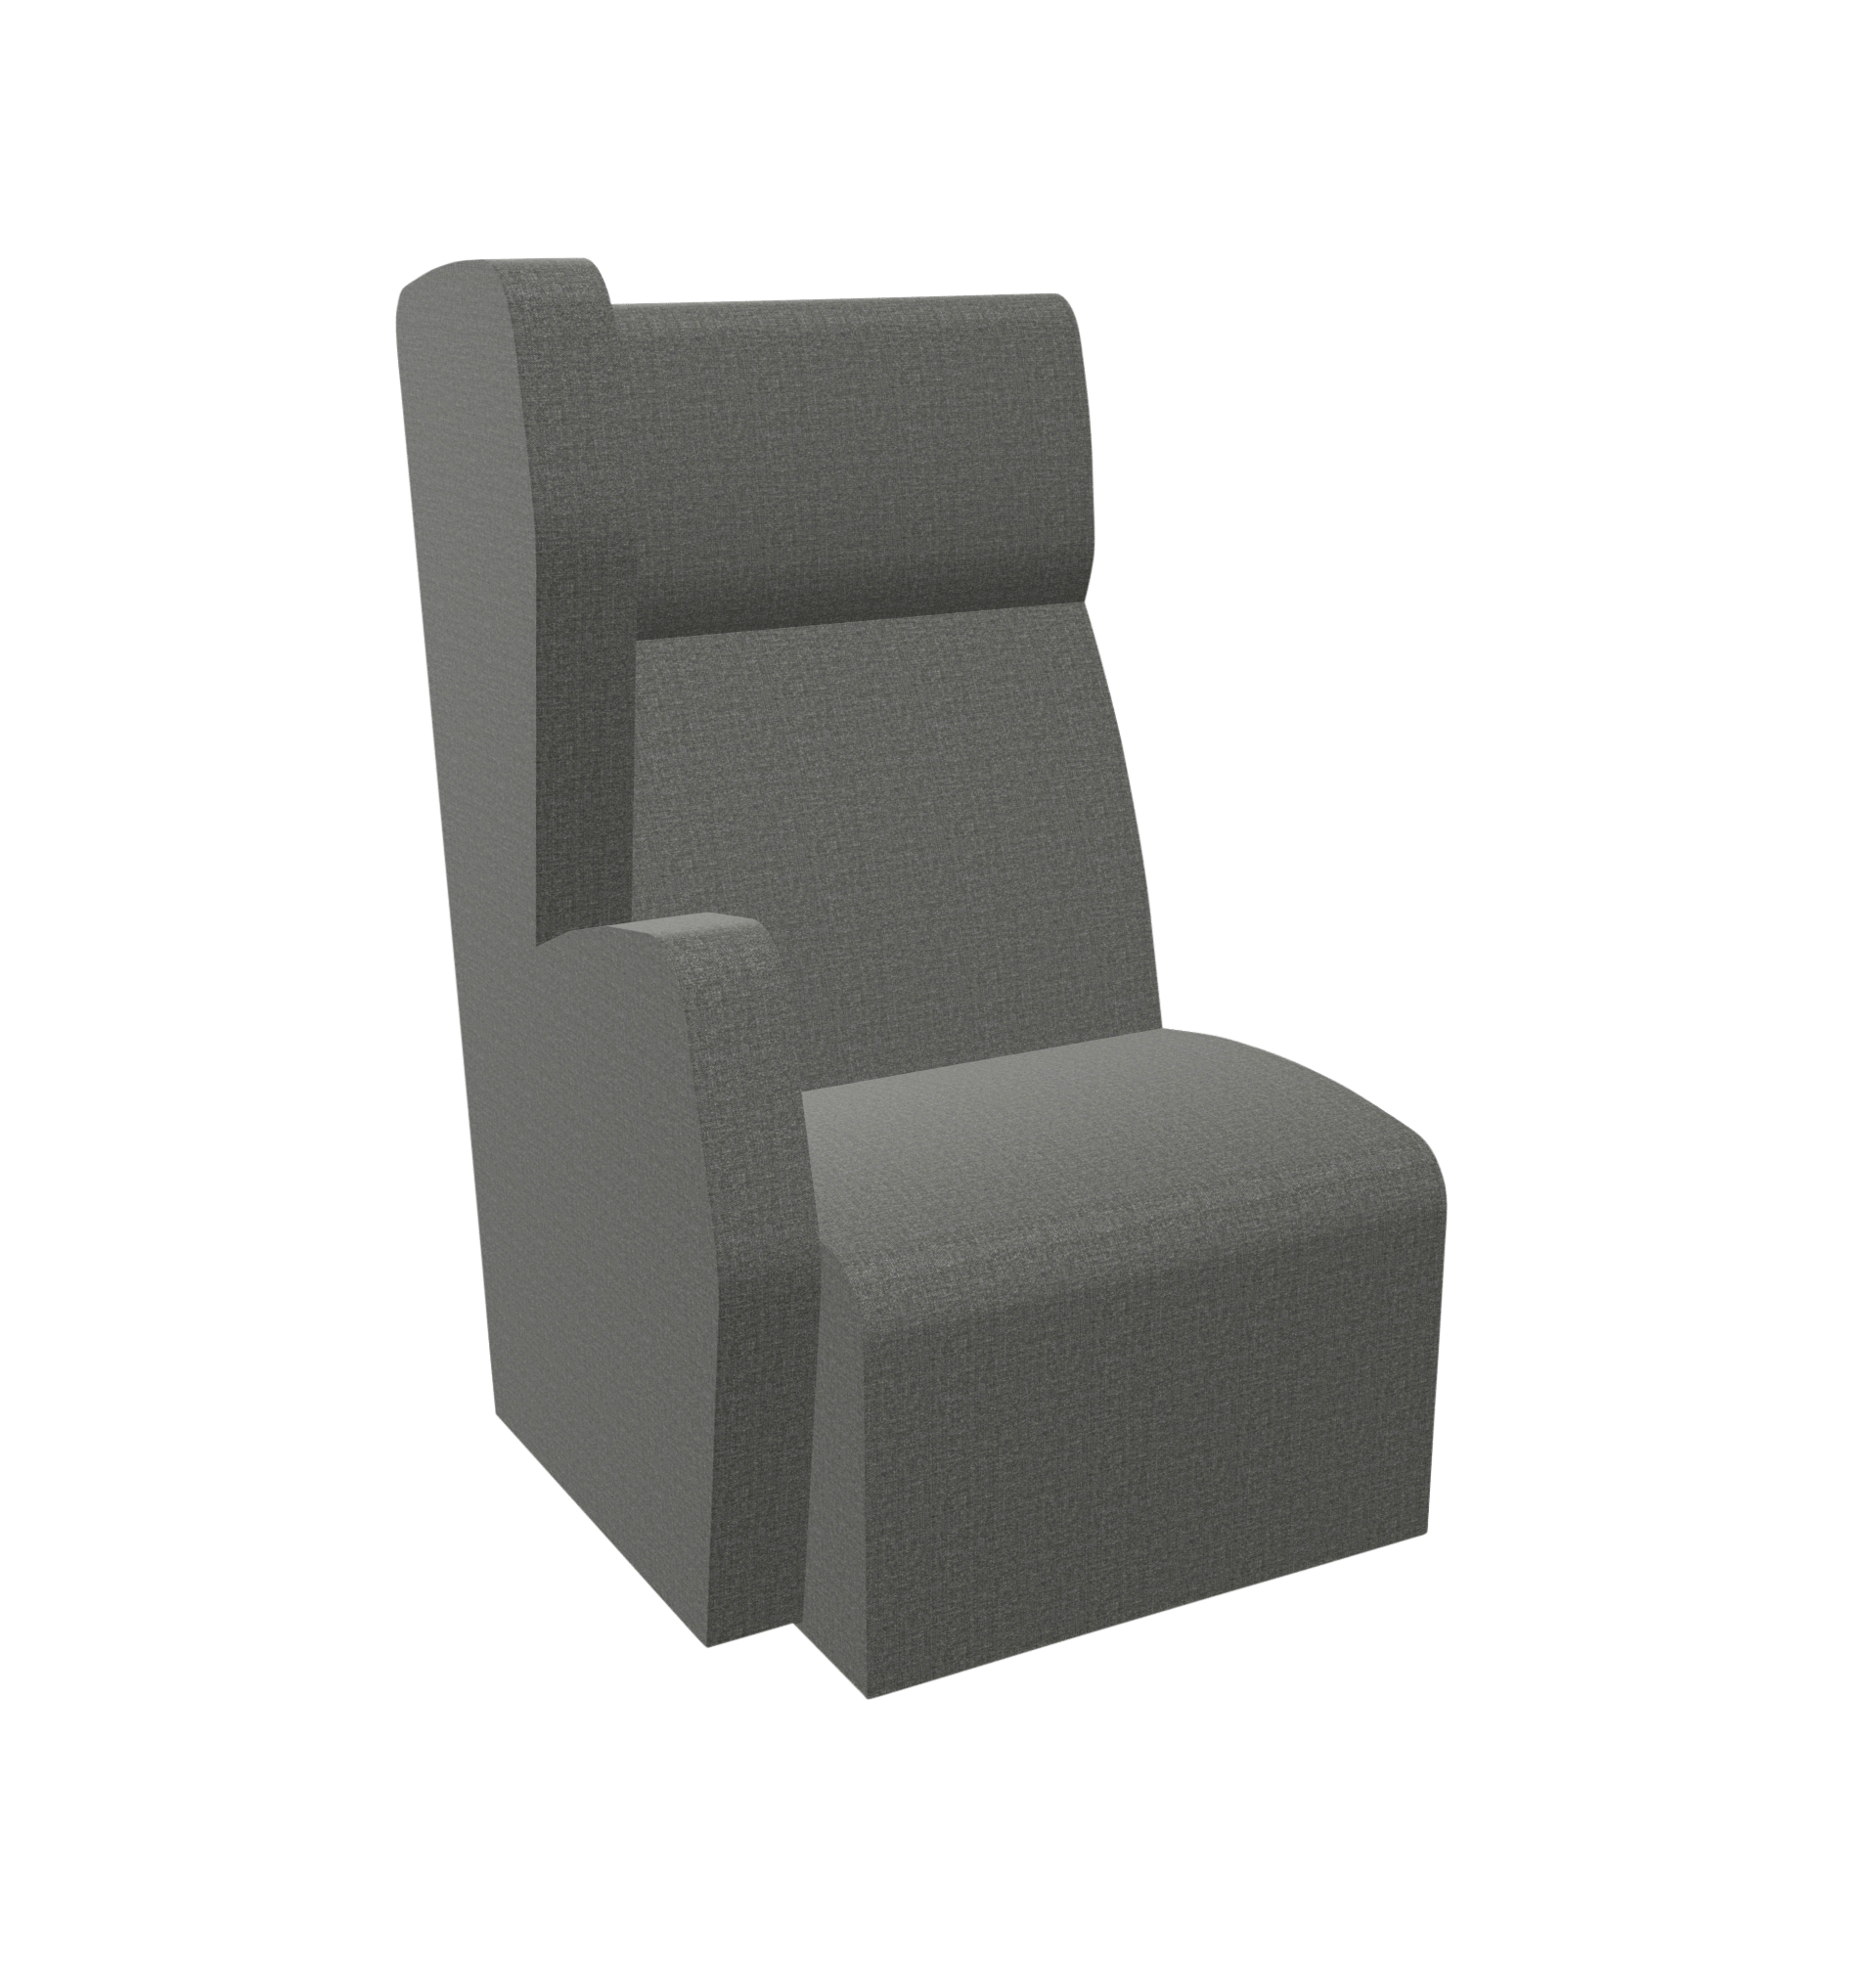 modular seating end section